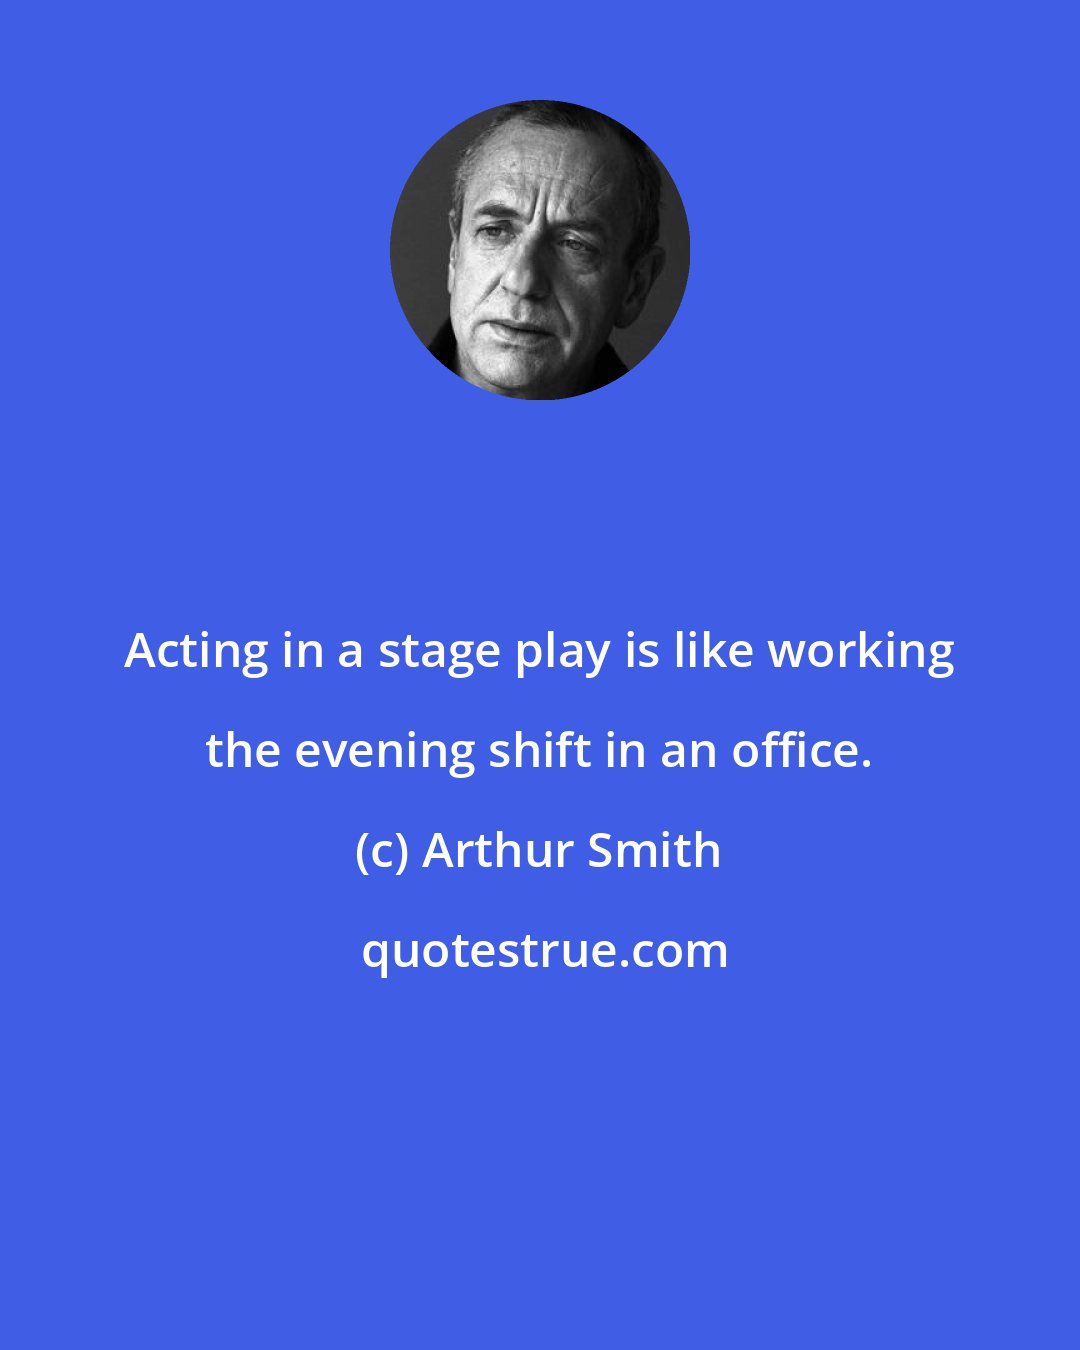 Arthur Smith: Acting in a stage play is like working the evening shift in an office.